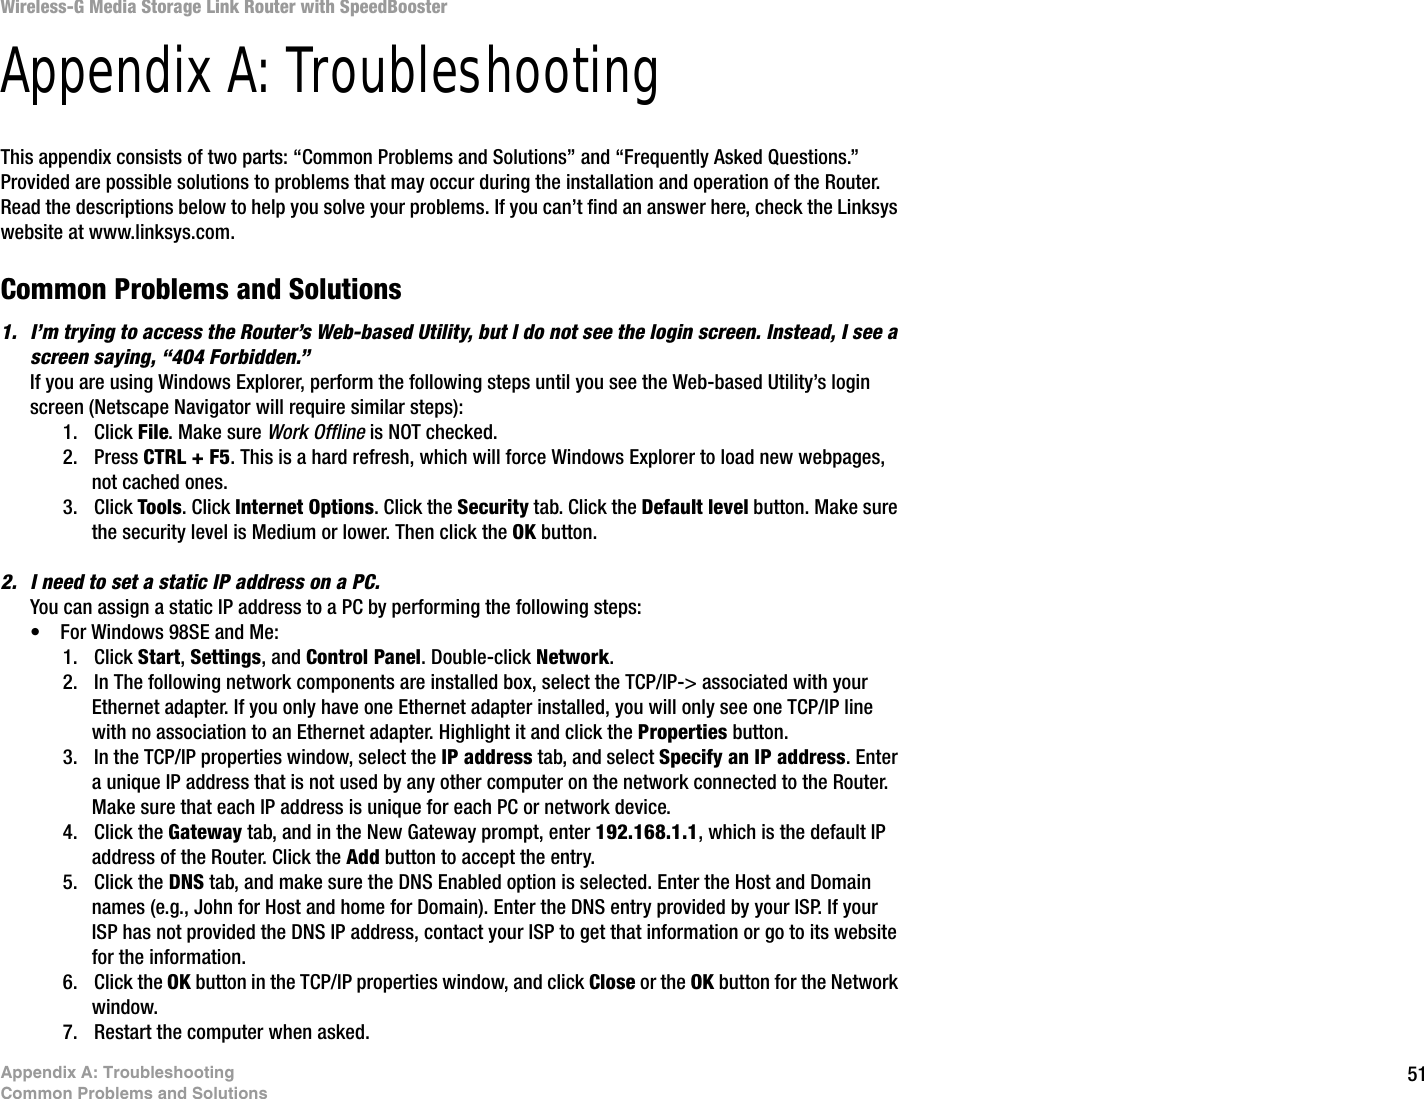 51Appendix A: TroubleshootingCommon Problems and SolutionsWireless-G Media Storage Link Router with SpeedBoosterAppendix A: TroubleshootingThis appendix consists of two parts: “Common Problems and Solutions” and “Frequently Asked Questions.” Provided are possible solutions to problems that may occur during the installation and operation of the Router. Read the descriptions below to help you solve your problems. If you can’t find an answer here, check the Linksys website at www.linksys.com.Common Problems and Solutions1. I’m trying to access the Router’s Web-based Utility, but I do not see the login screen. Instead, I see a screen saying, “404 Forbidden.”If you are using Windows Explorer, perform the following steps until you see the Web-based Utility’s login screen (Netscape Navigator will require similar steps):1. Click File. Make sure Work Offline is NOT checked.2. Press CTRL + F5. This is a hard refresh, which will force Windows Explorer to load new webpages, not cached ones.3. Click Tools. Click Internet Options. Click the Security tab. Click the Default level button. Make sure the security level is Medium or lower. Then click the OK button.2. I need to set a static IP address on a PC.You can assign a static IP address to a PC by performing the following steps:• For Windows 98SE and Me:1. Click Start, Settings, and Control Panel. Double-click Network.2. In The following network components are installed box, select the TCP/IP-&gt; associated with your Ethernet adapter. If you only have one Ethernet adapter installed, you will only see one TCP/IP line with no association to an Ethernet adapter. Highlight it and click the Properties button.3. In the TCP/IP properties window, select the IP address tab, and select Specify an IP address. Enter a unique IP address that is not used by any other computer on the network connected to the Router. Make sure that each IP address is unique for each PC or network device.4. Click the Gateway tab, and in the New Gateway prompt, enter 192.168.1.1, which is the default IP address of the Router. Click the Add button to accept the entry.5. Click the DNS tab, and make sure the DNS Enabled option is selected. Enter the Host and Domain names (e.g., John for Host and home for Domain). Enter the DNS entry provided by your ISP. If your ISP has not provided the DNS IP address, contact your ISP to get that information or go to its website for the information.6. Click the OK button in the TCP/IP properties window, and click Close or the OK button for the Network window.7. Restart the computer when asked.